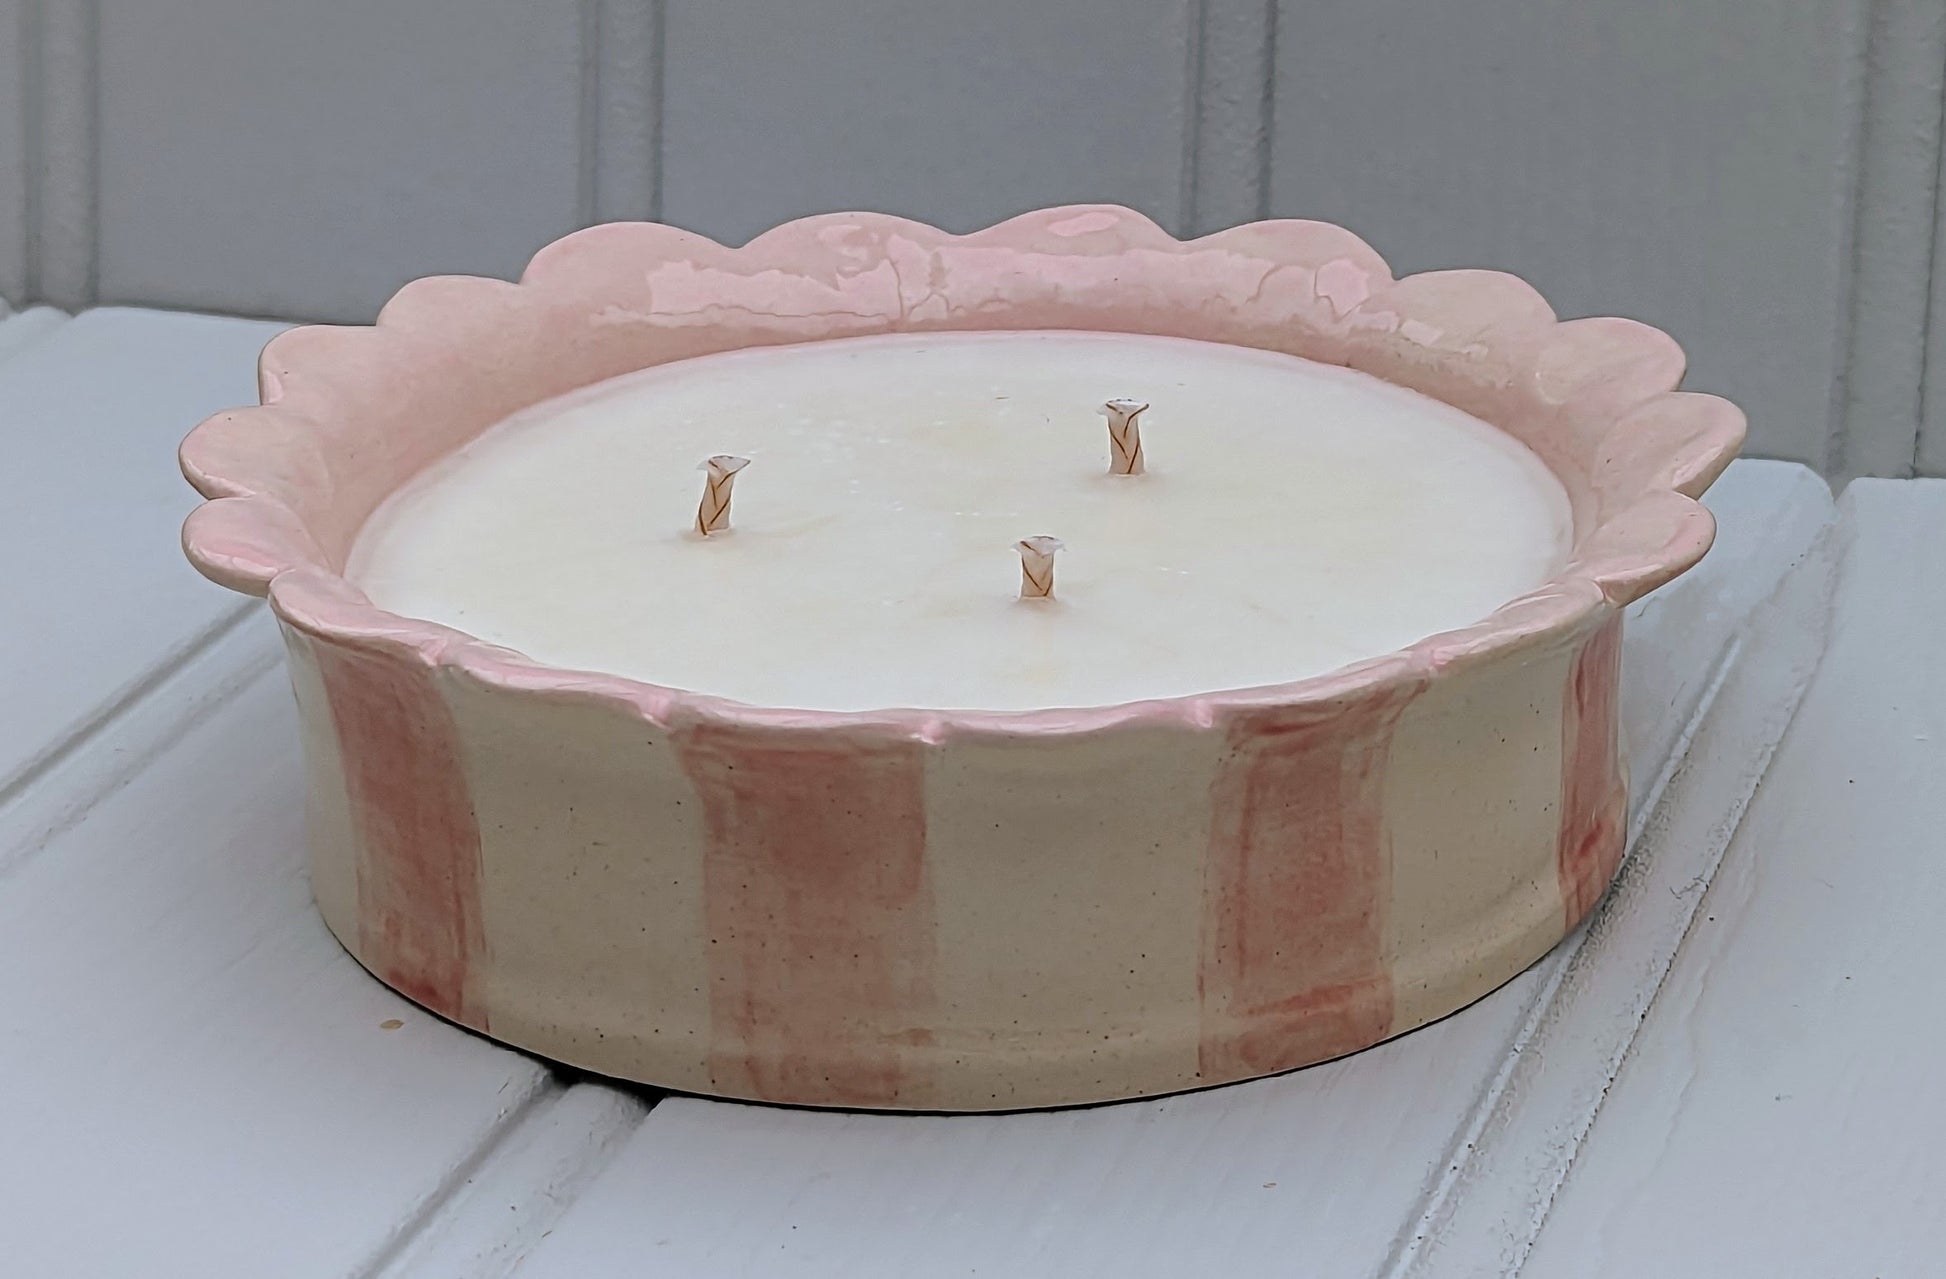 A 3 wick candle in a pink striped ceramic scalloped edge candle holder